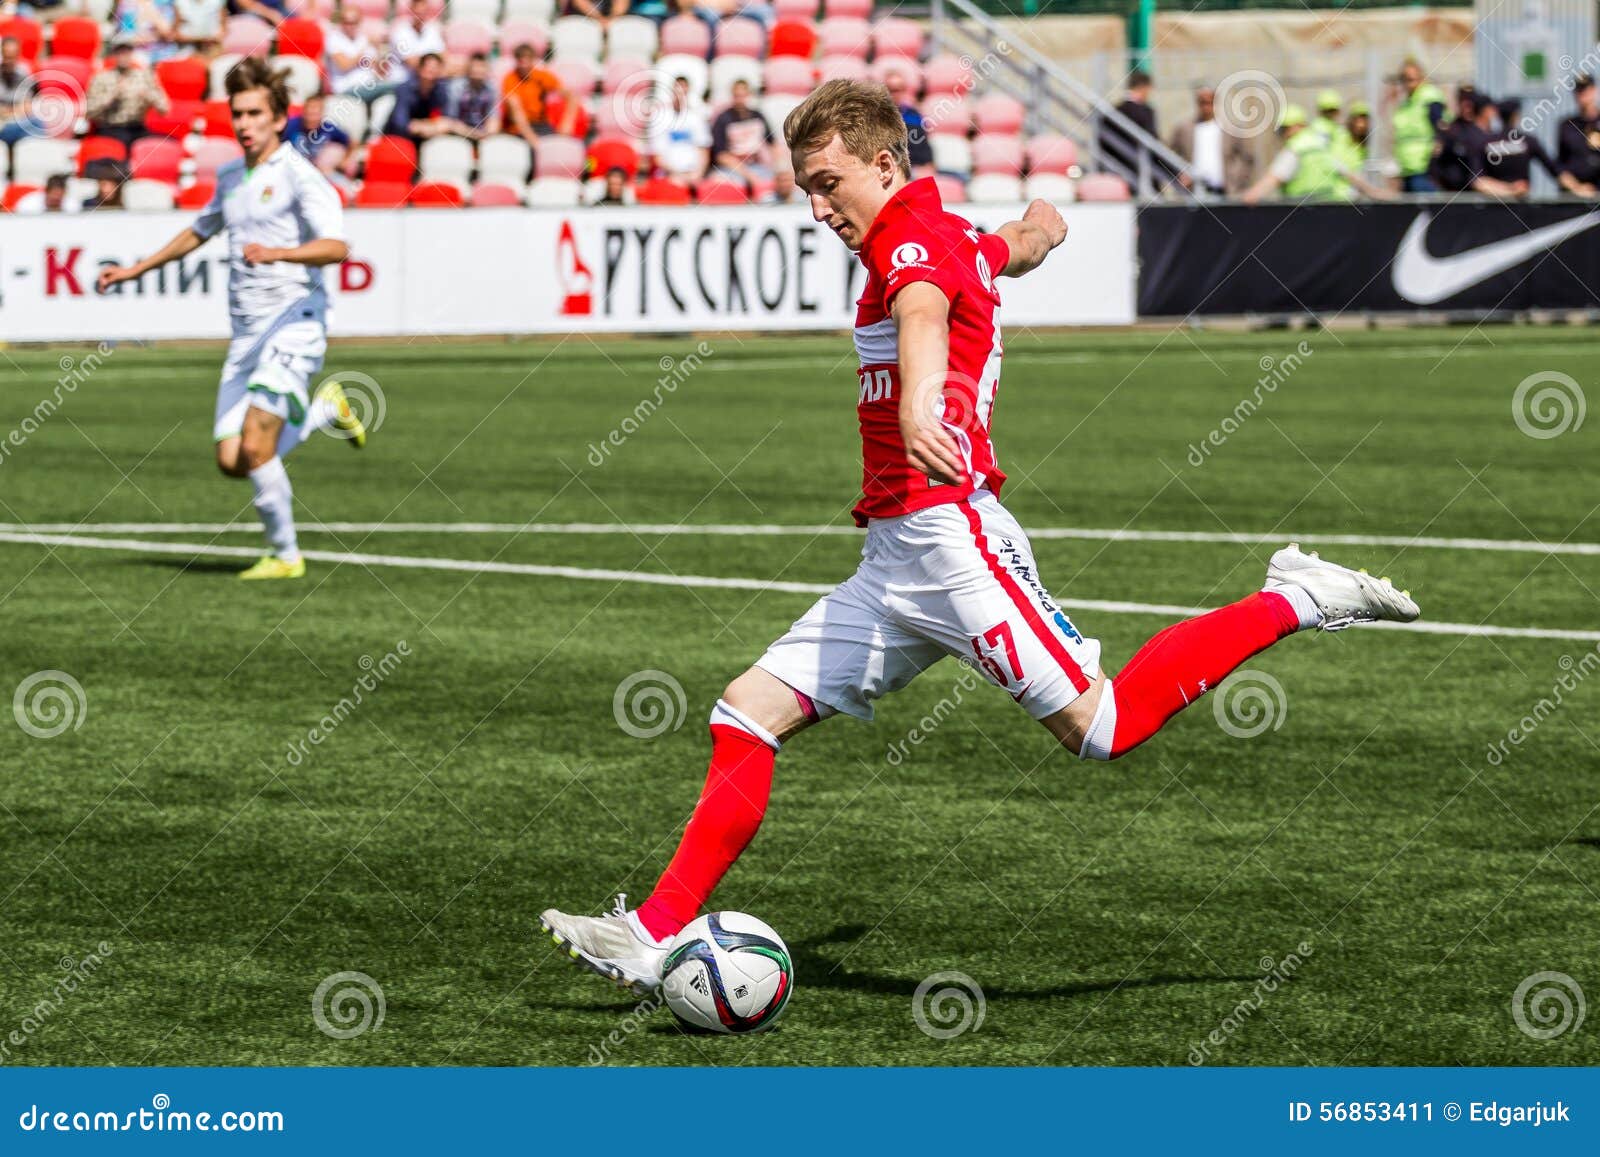 16.07.15 Spartak Moscow-youth 2-3 Ufa-youth, Game Moments Editorial  Photography - Image of player, lawn: 56853507